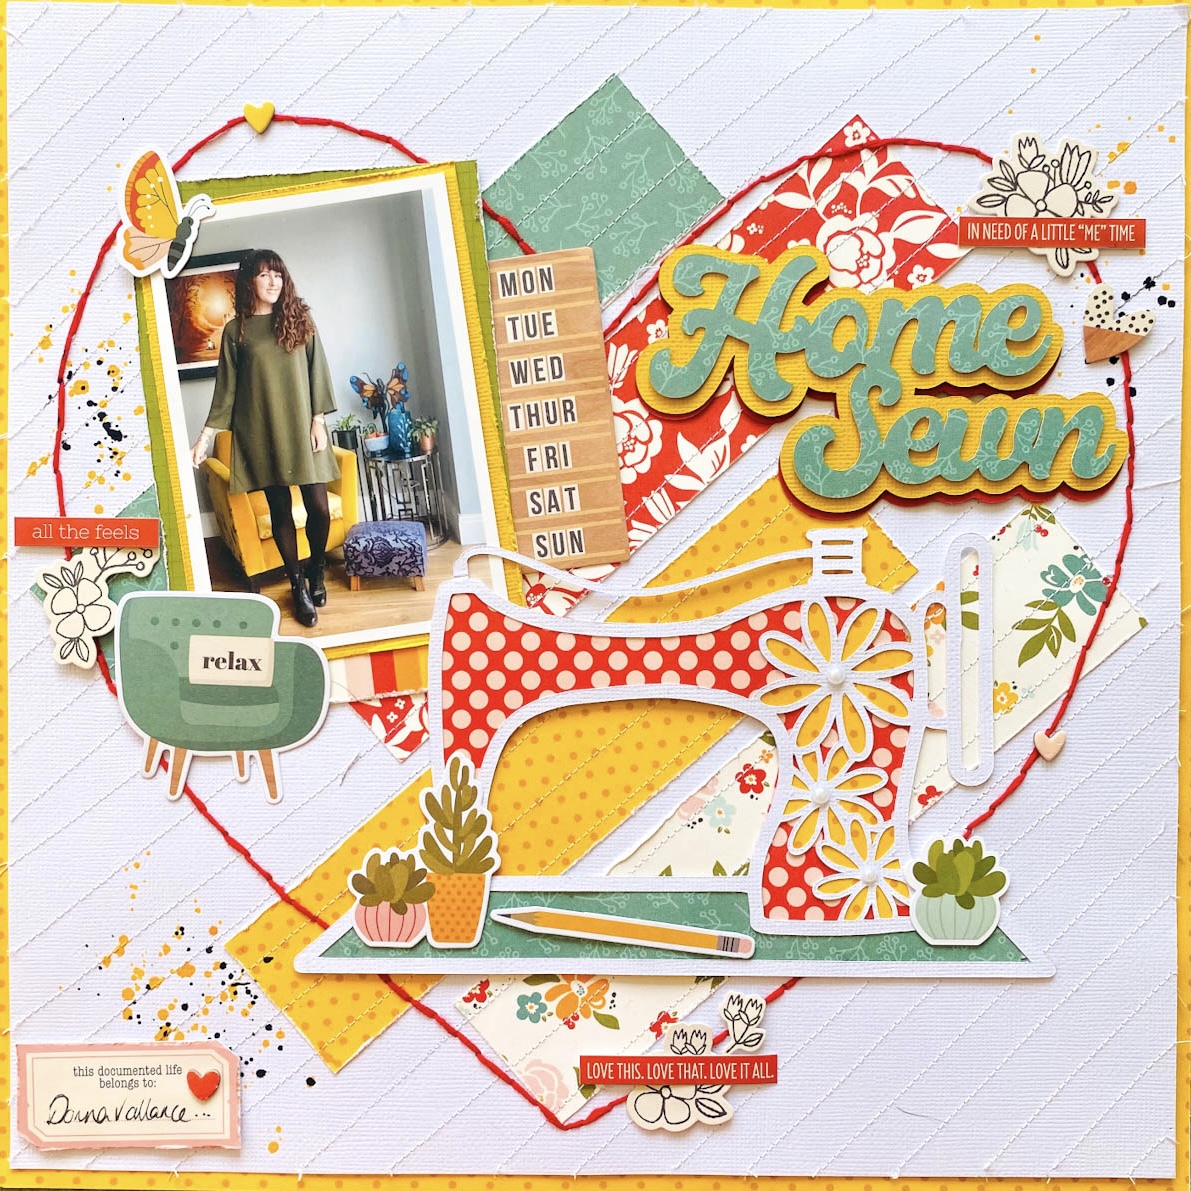 Scrapbooking page with home sewn title and a sewing machine